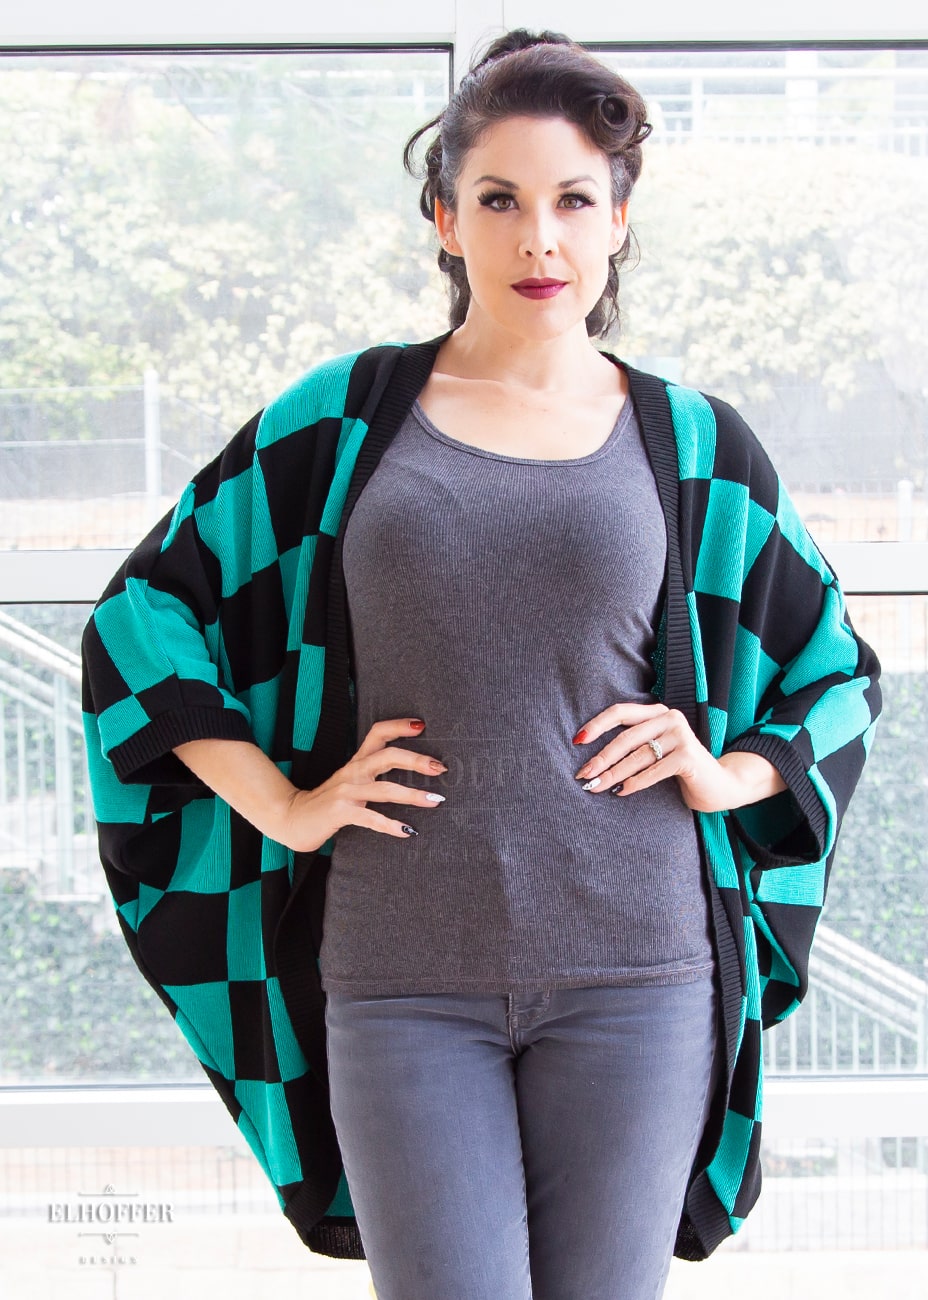 Kit, a fair skinned S model with long dark brown hair pulled back in a pony tail, is wearing a XL-3XL sample of a shrug with a black and green chessboard pattern. The shrug featured 3/4 sleeves and black ribbing along edges and cuffs. The XL-3XL sample is oversized on her, she would order the XS-L for a more fitted look.